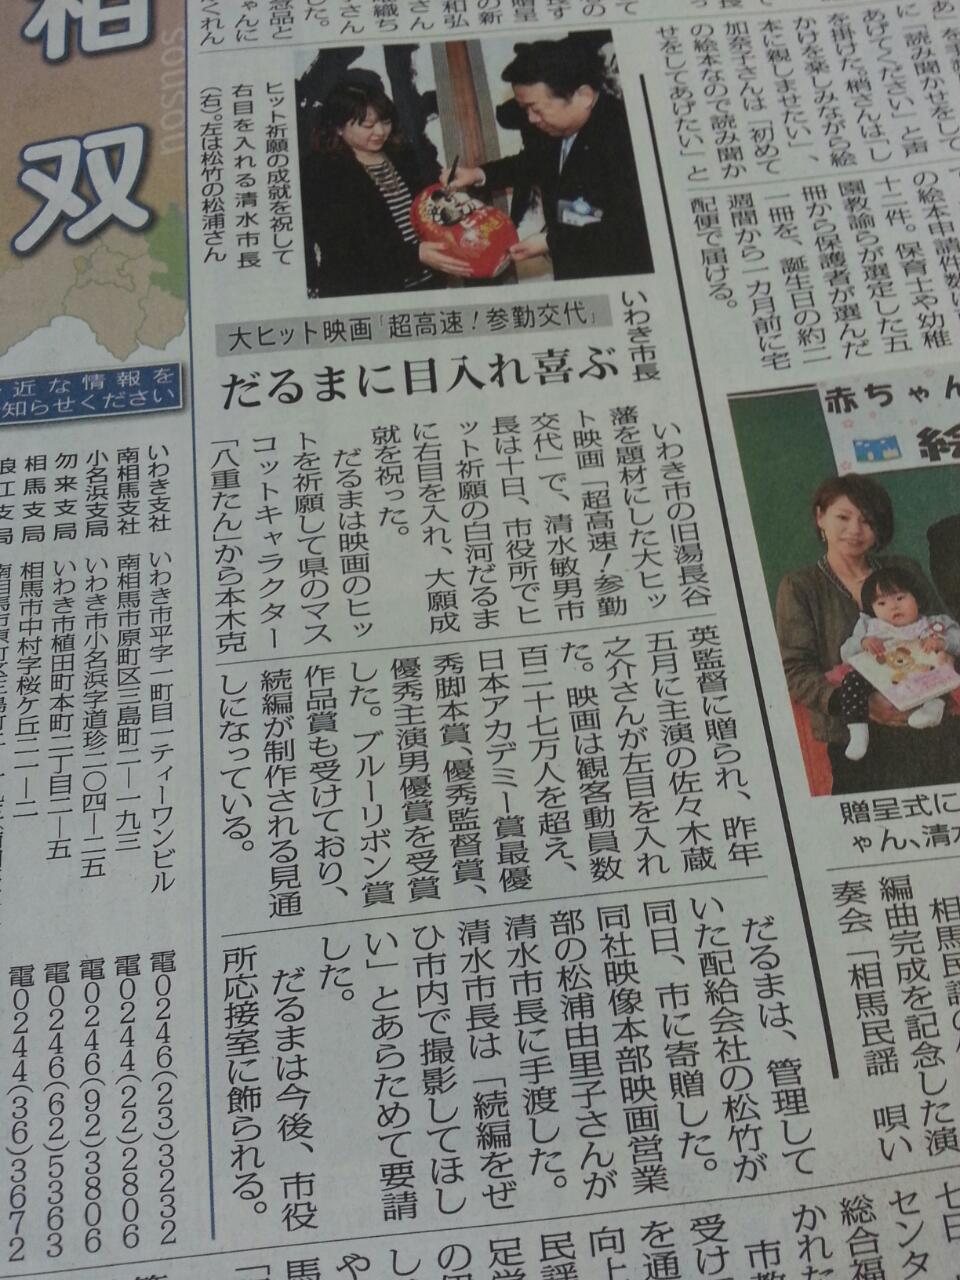 newspaper clipping about japan with two women and baby